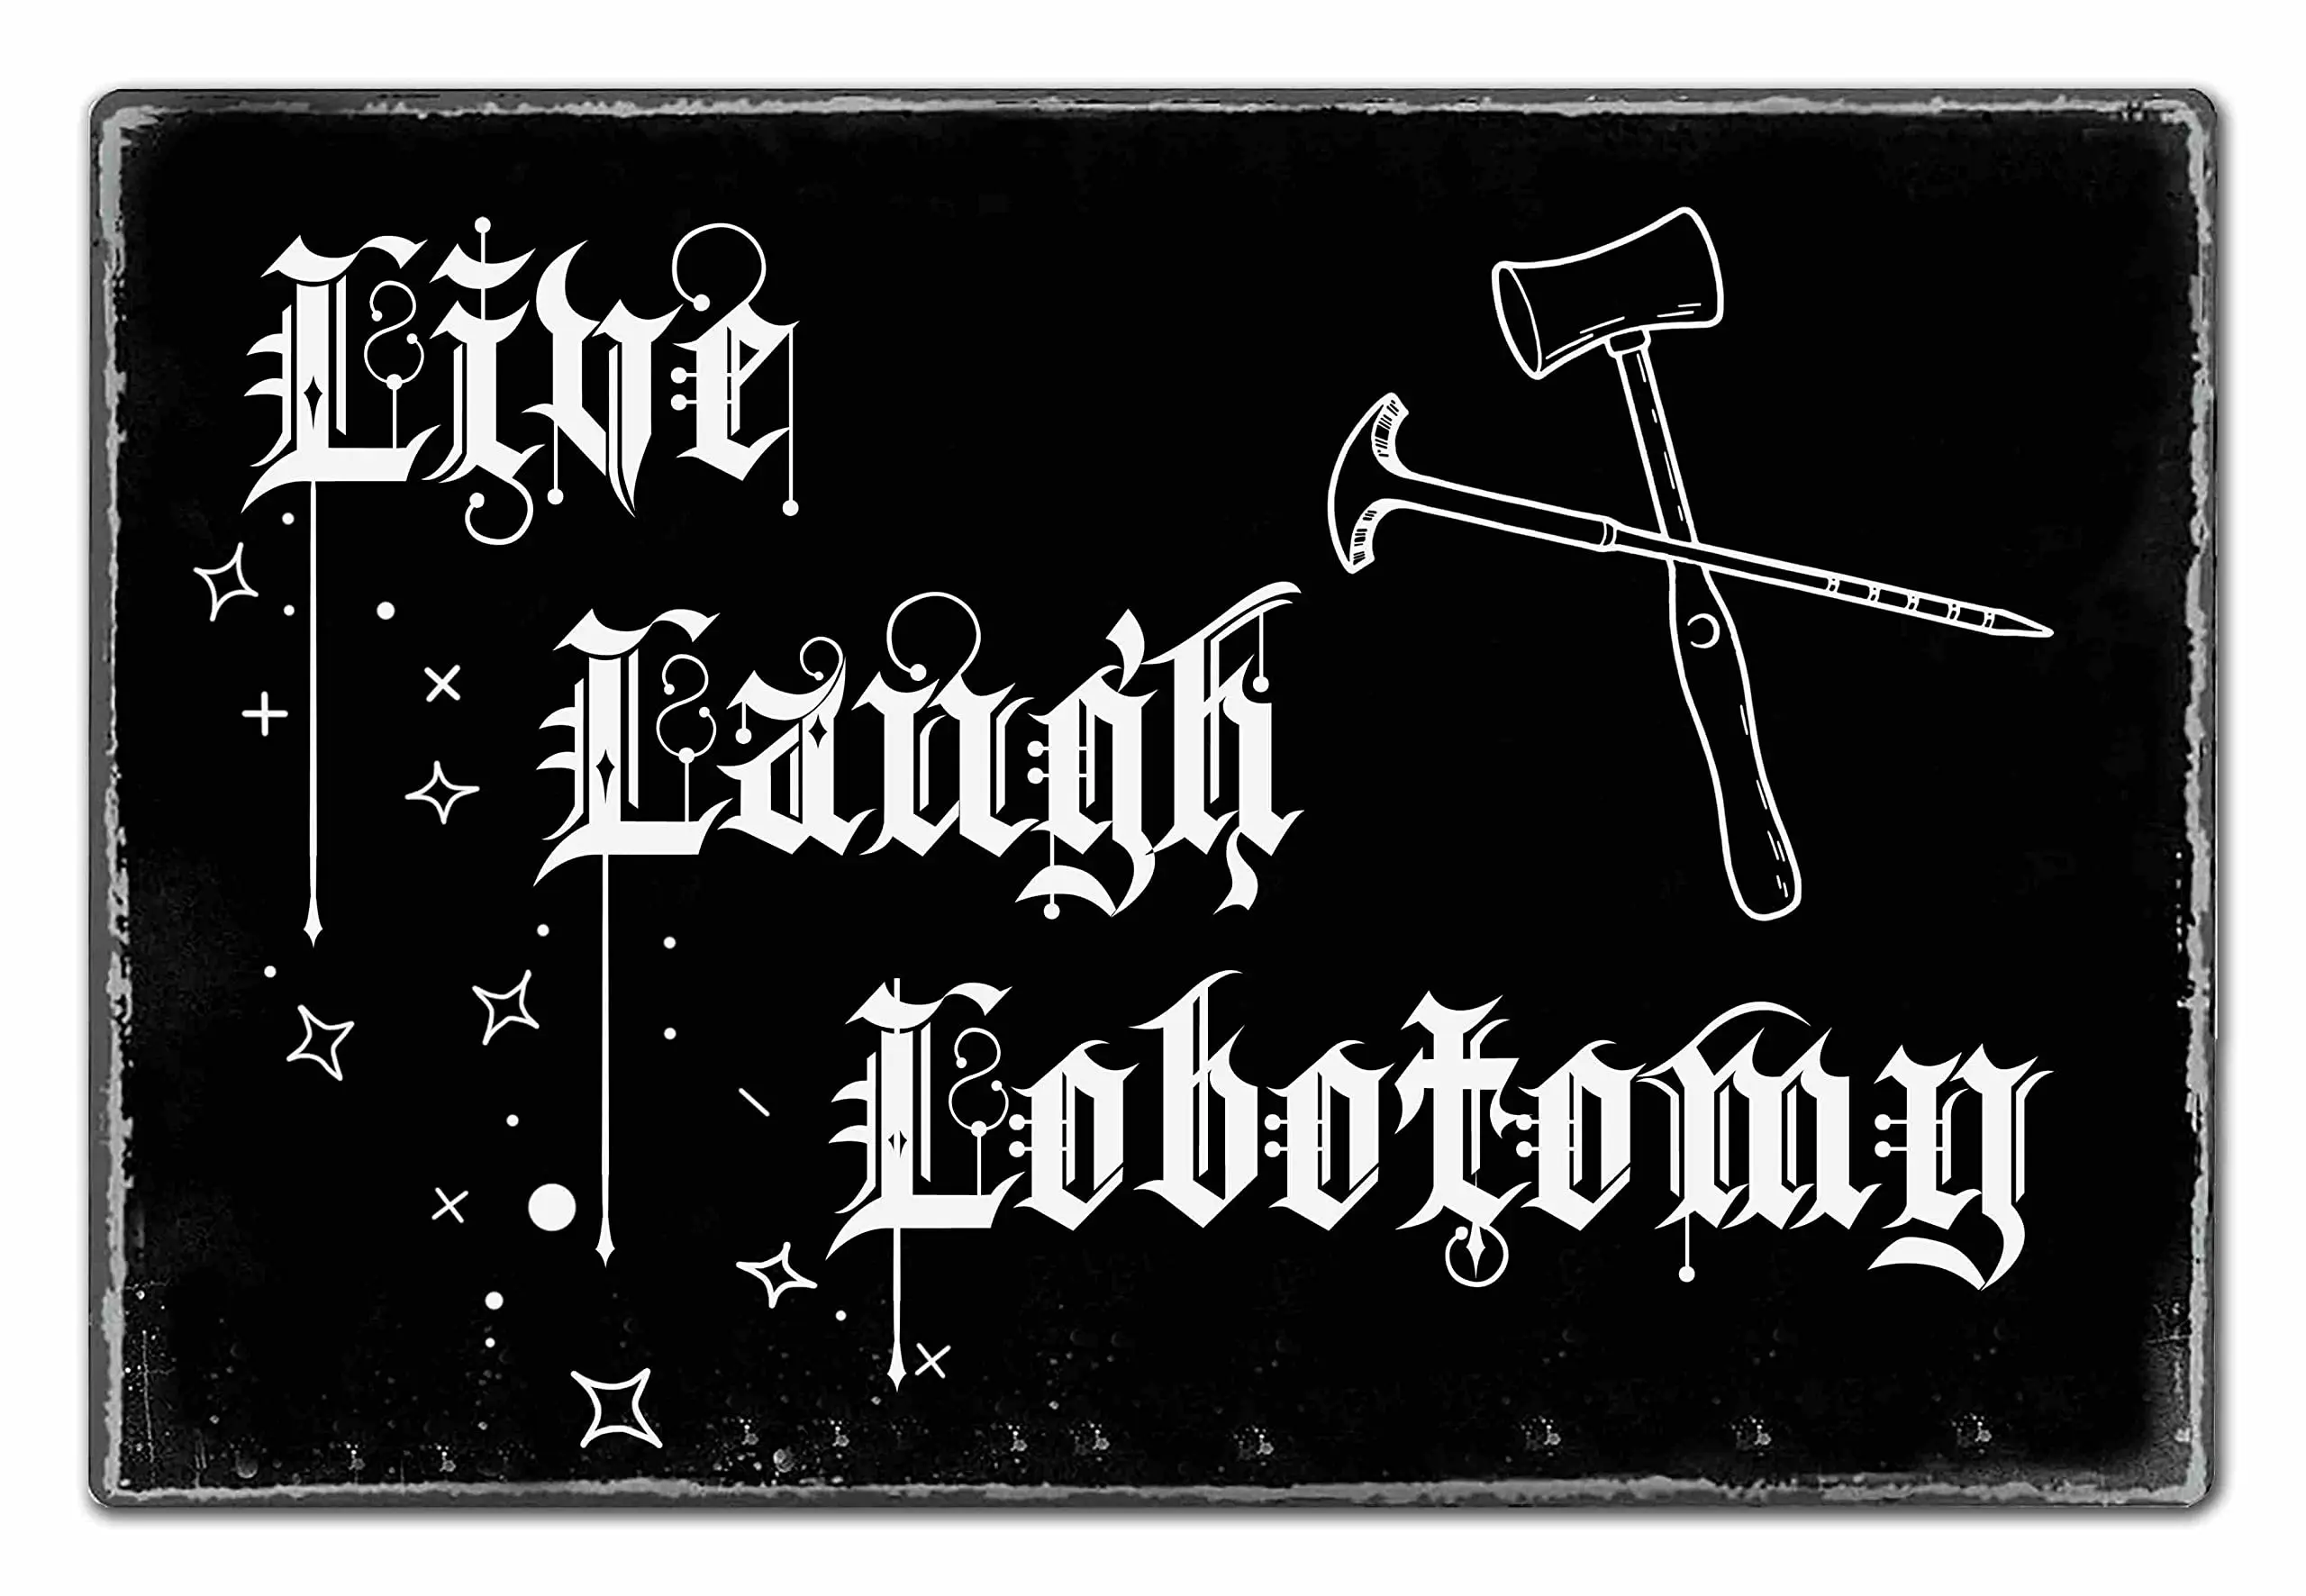 

Funny Dark Humor Goth Halloween Wall Decor Live Laugh Lobotomy Sign For Gothic Room, Home, Bedroom, Bathroom,